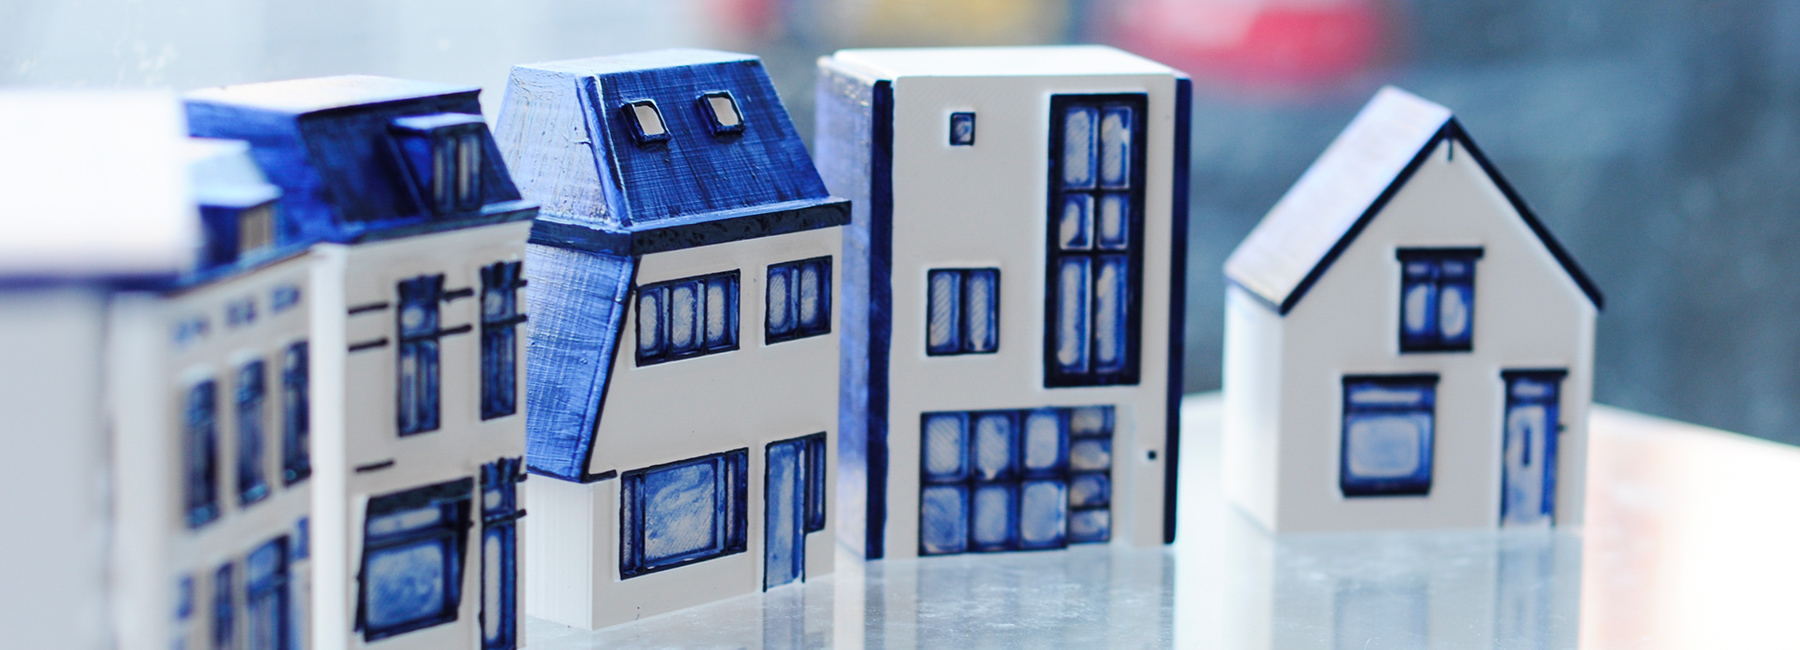 local makers hand-paint customized, miniature 3D printed delft houses